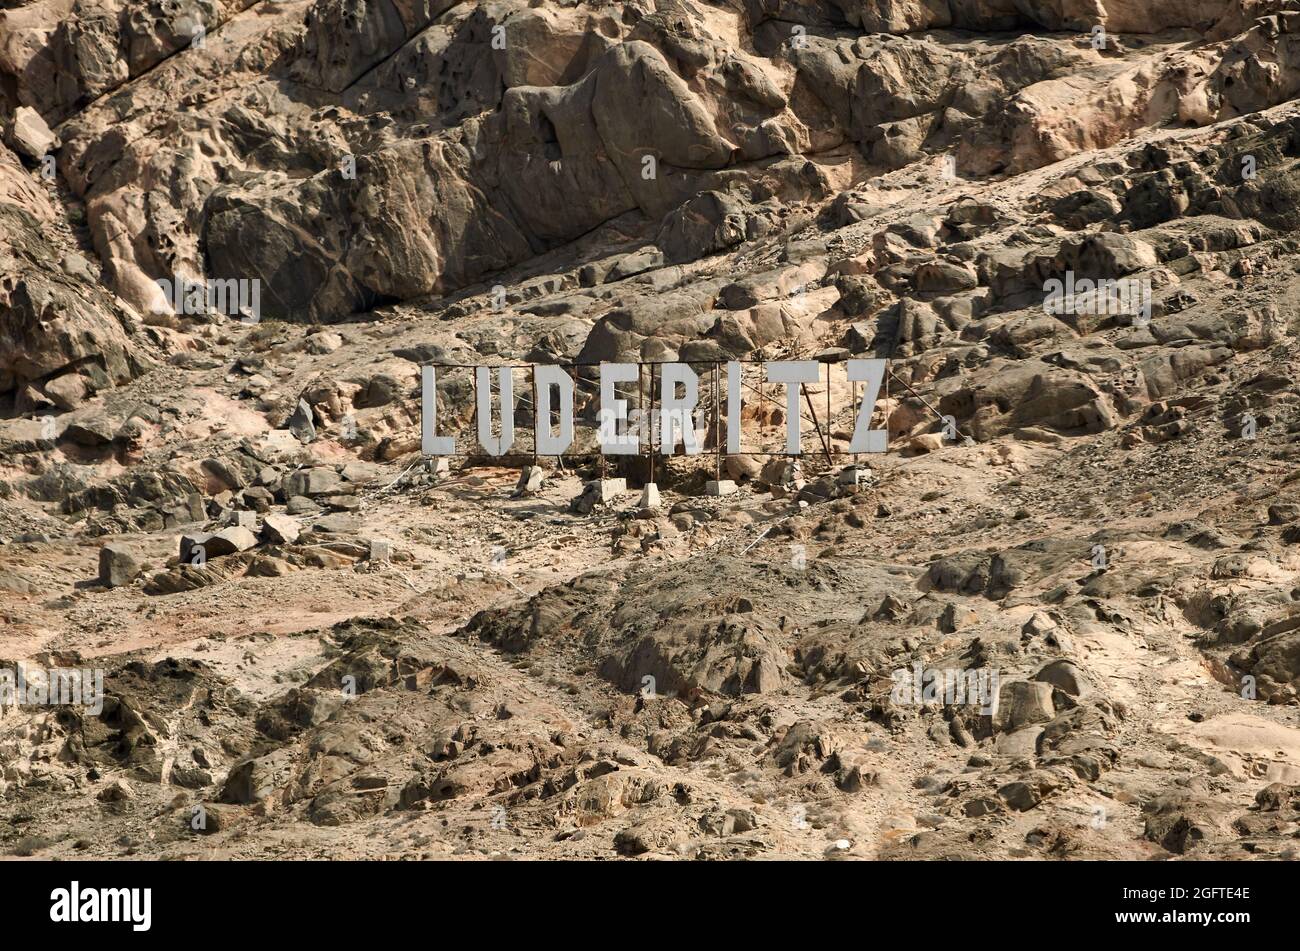 Luderitz town sign in the cliffs of Namibia. Stock Photo